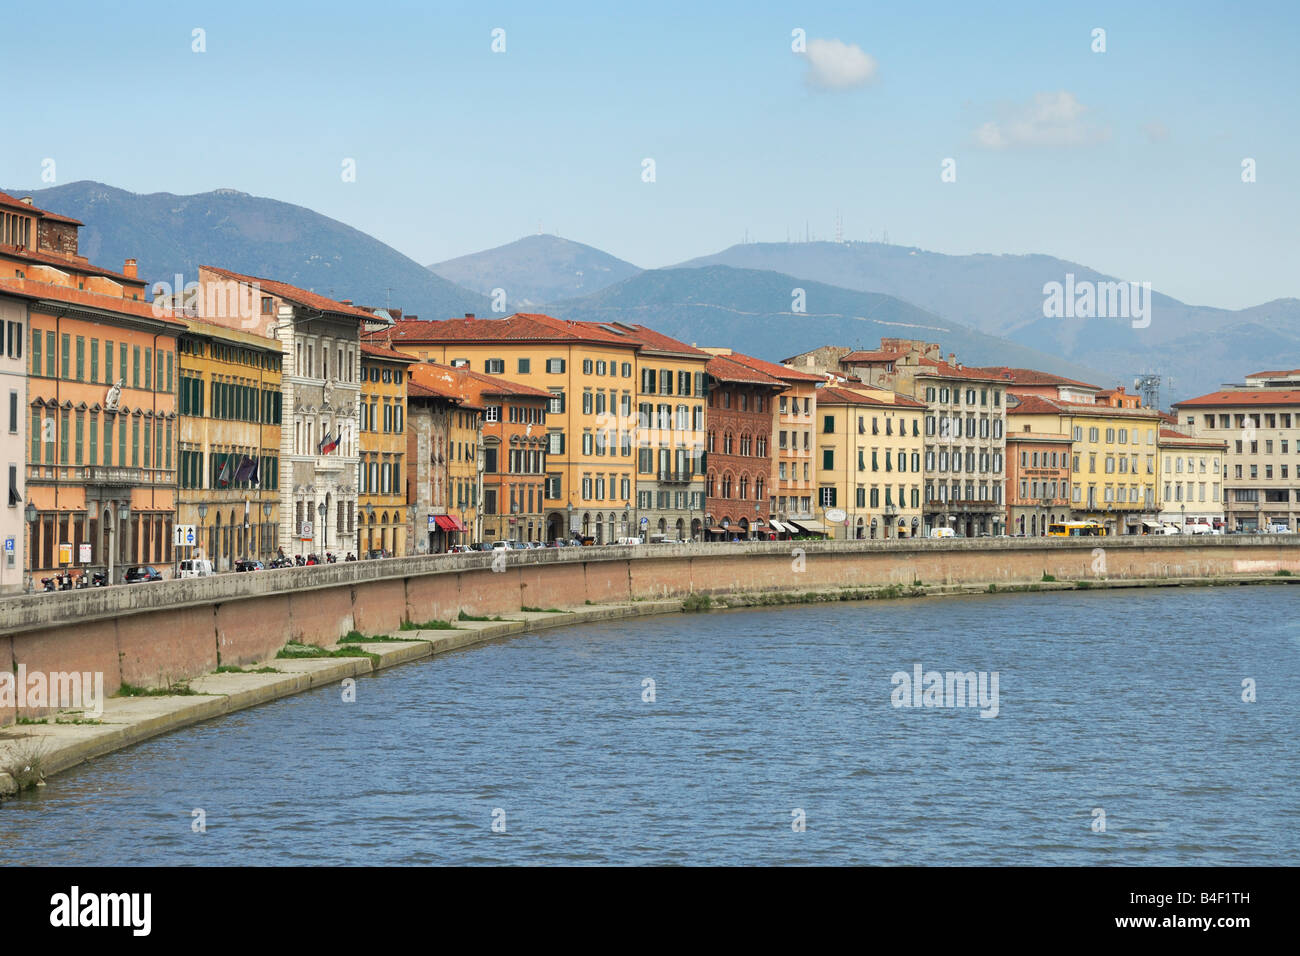 Pisa Italy Buildings overlooking the Arno River Stock Photo